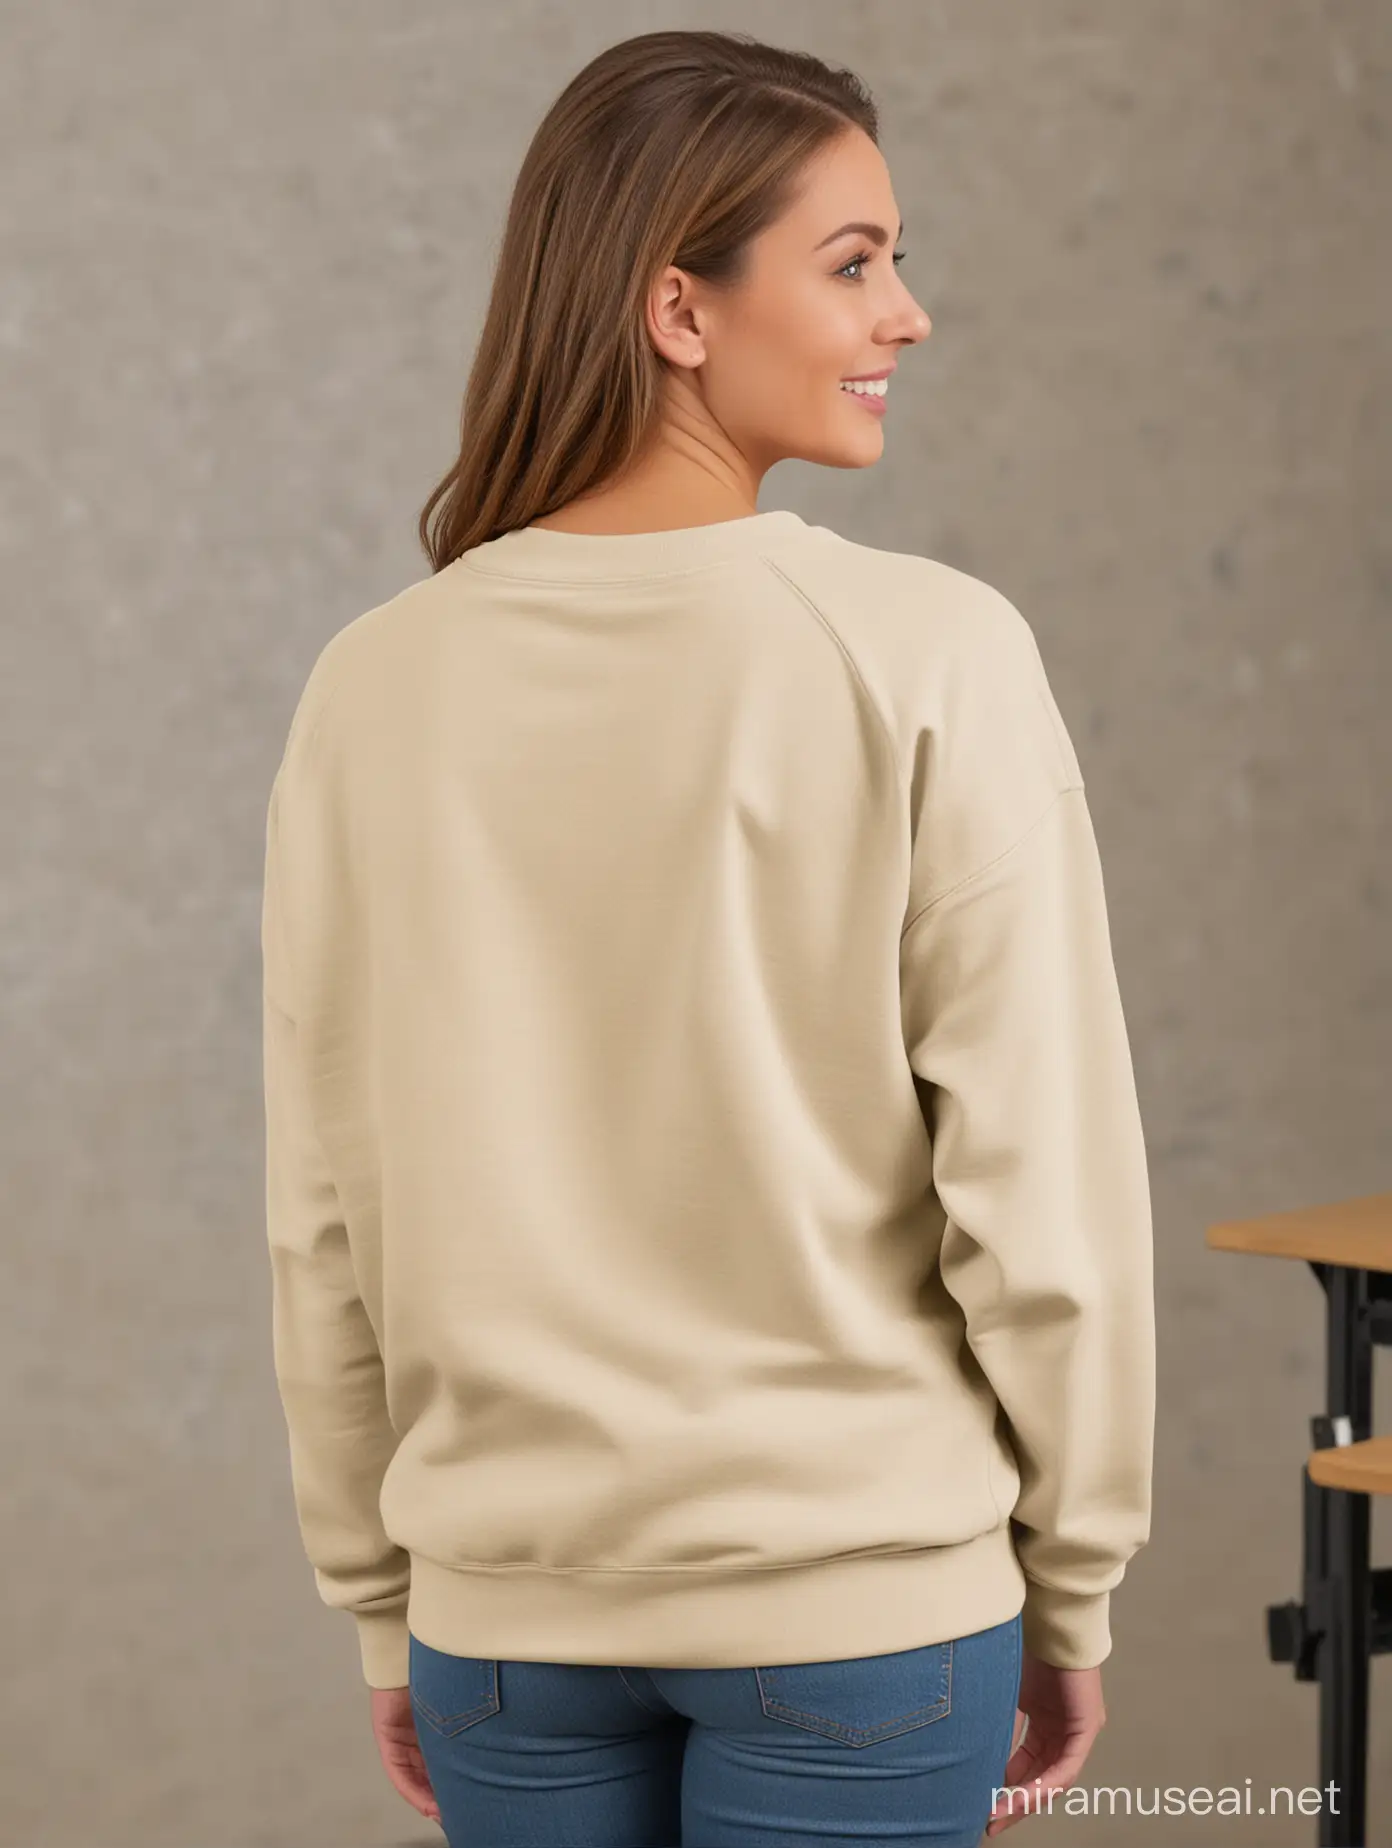 Gildan 1800 sweatshirt in sand color, back view worn by a teacher in a classroom